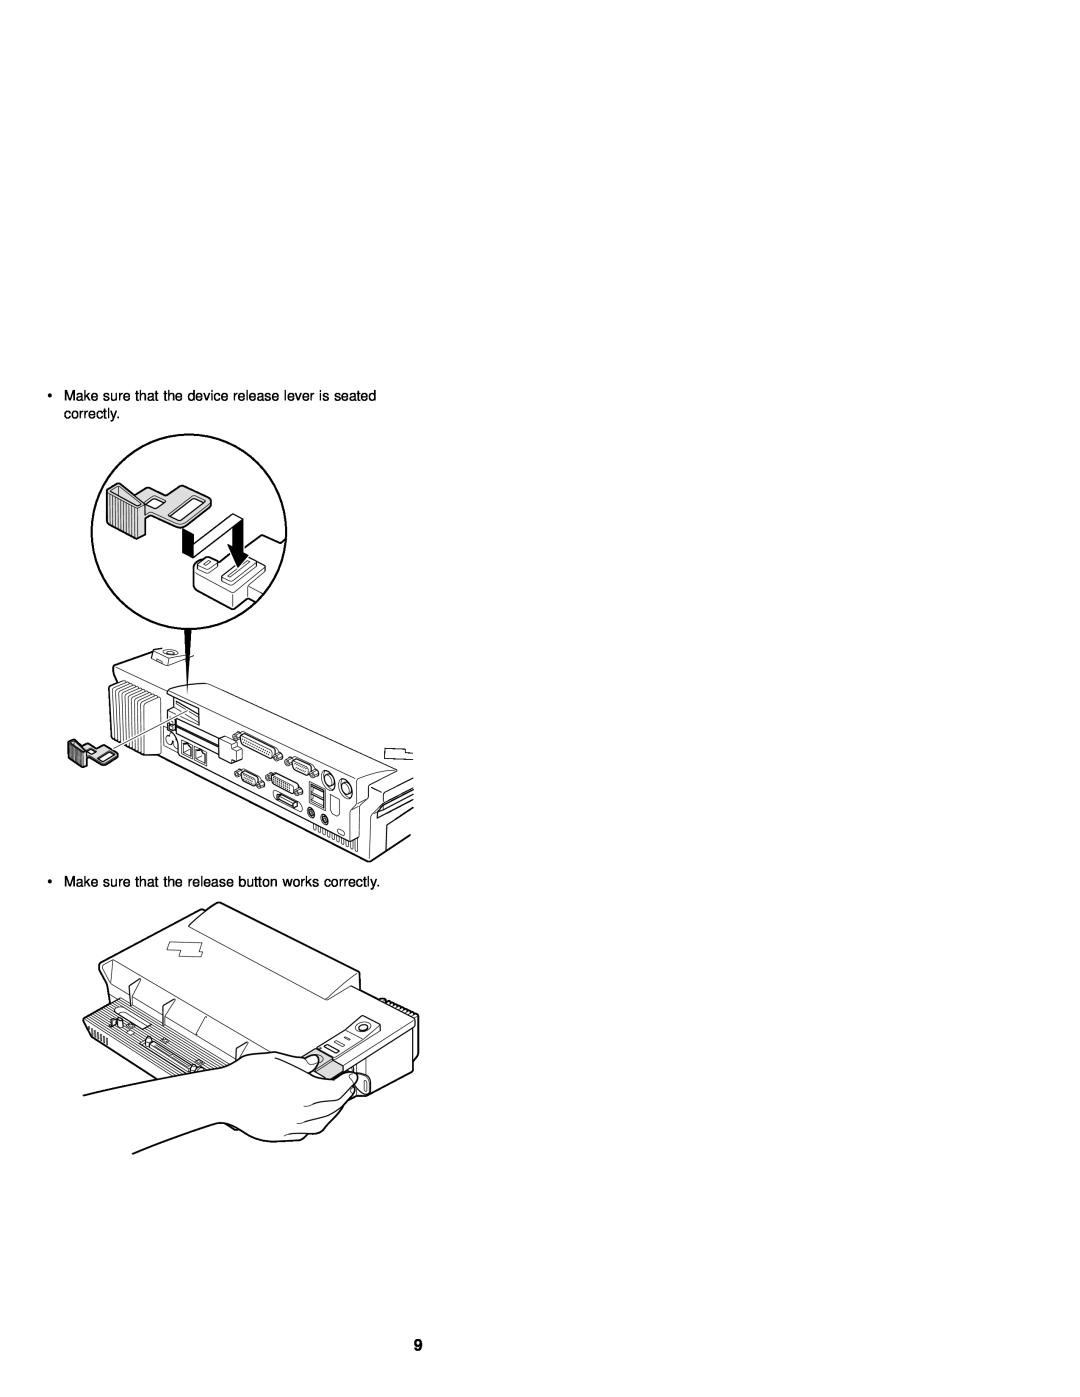 IBM 92P1836 manual v Make sure that the device release lever is seated correctly 